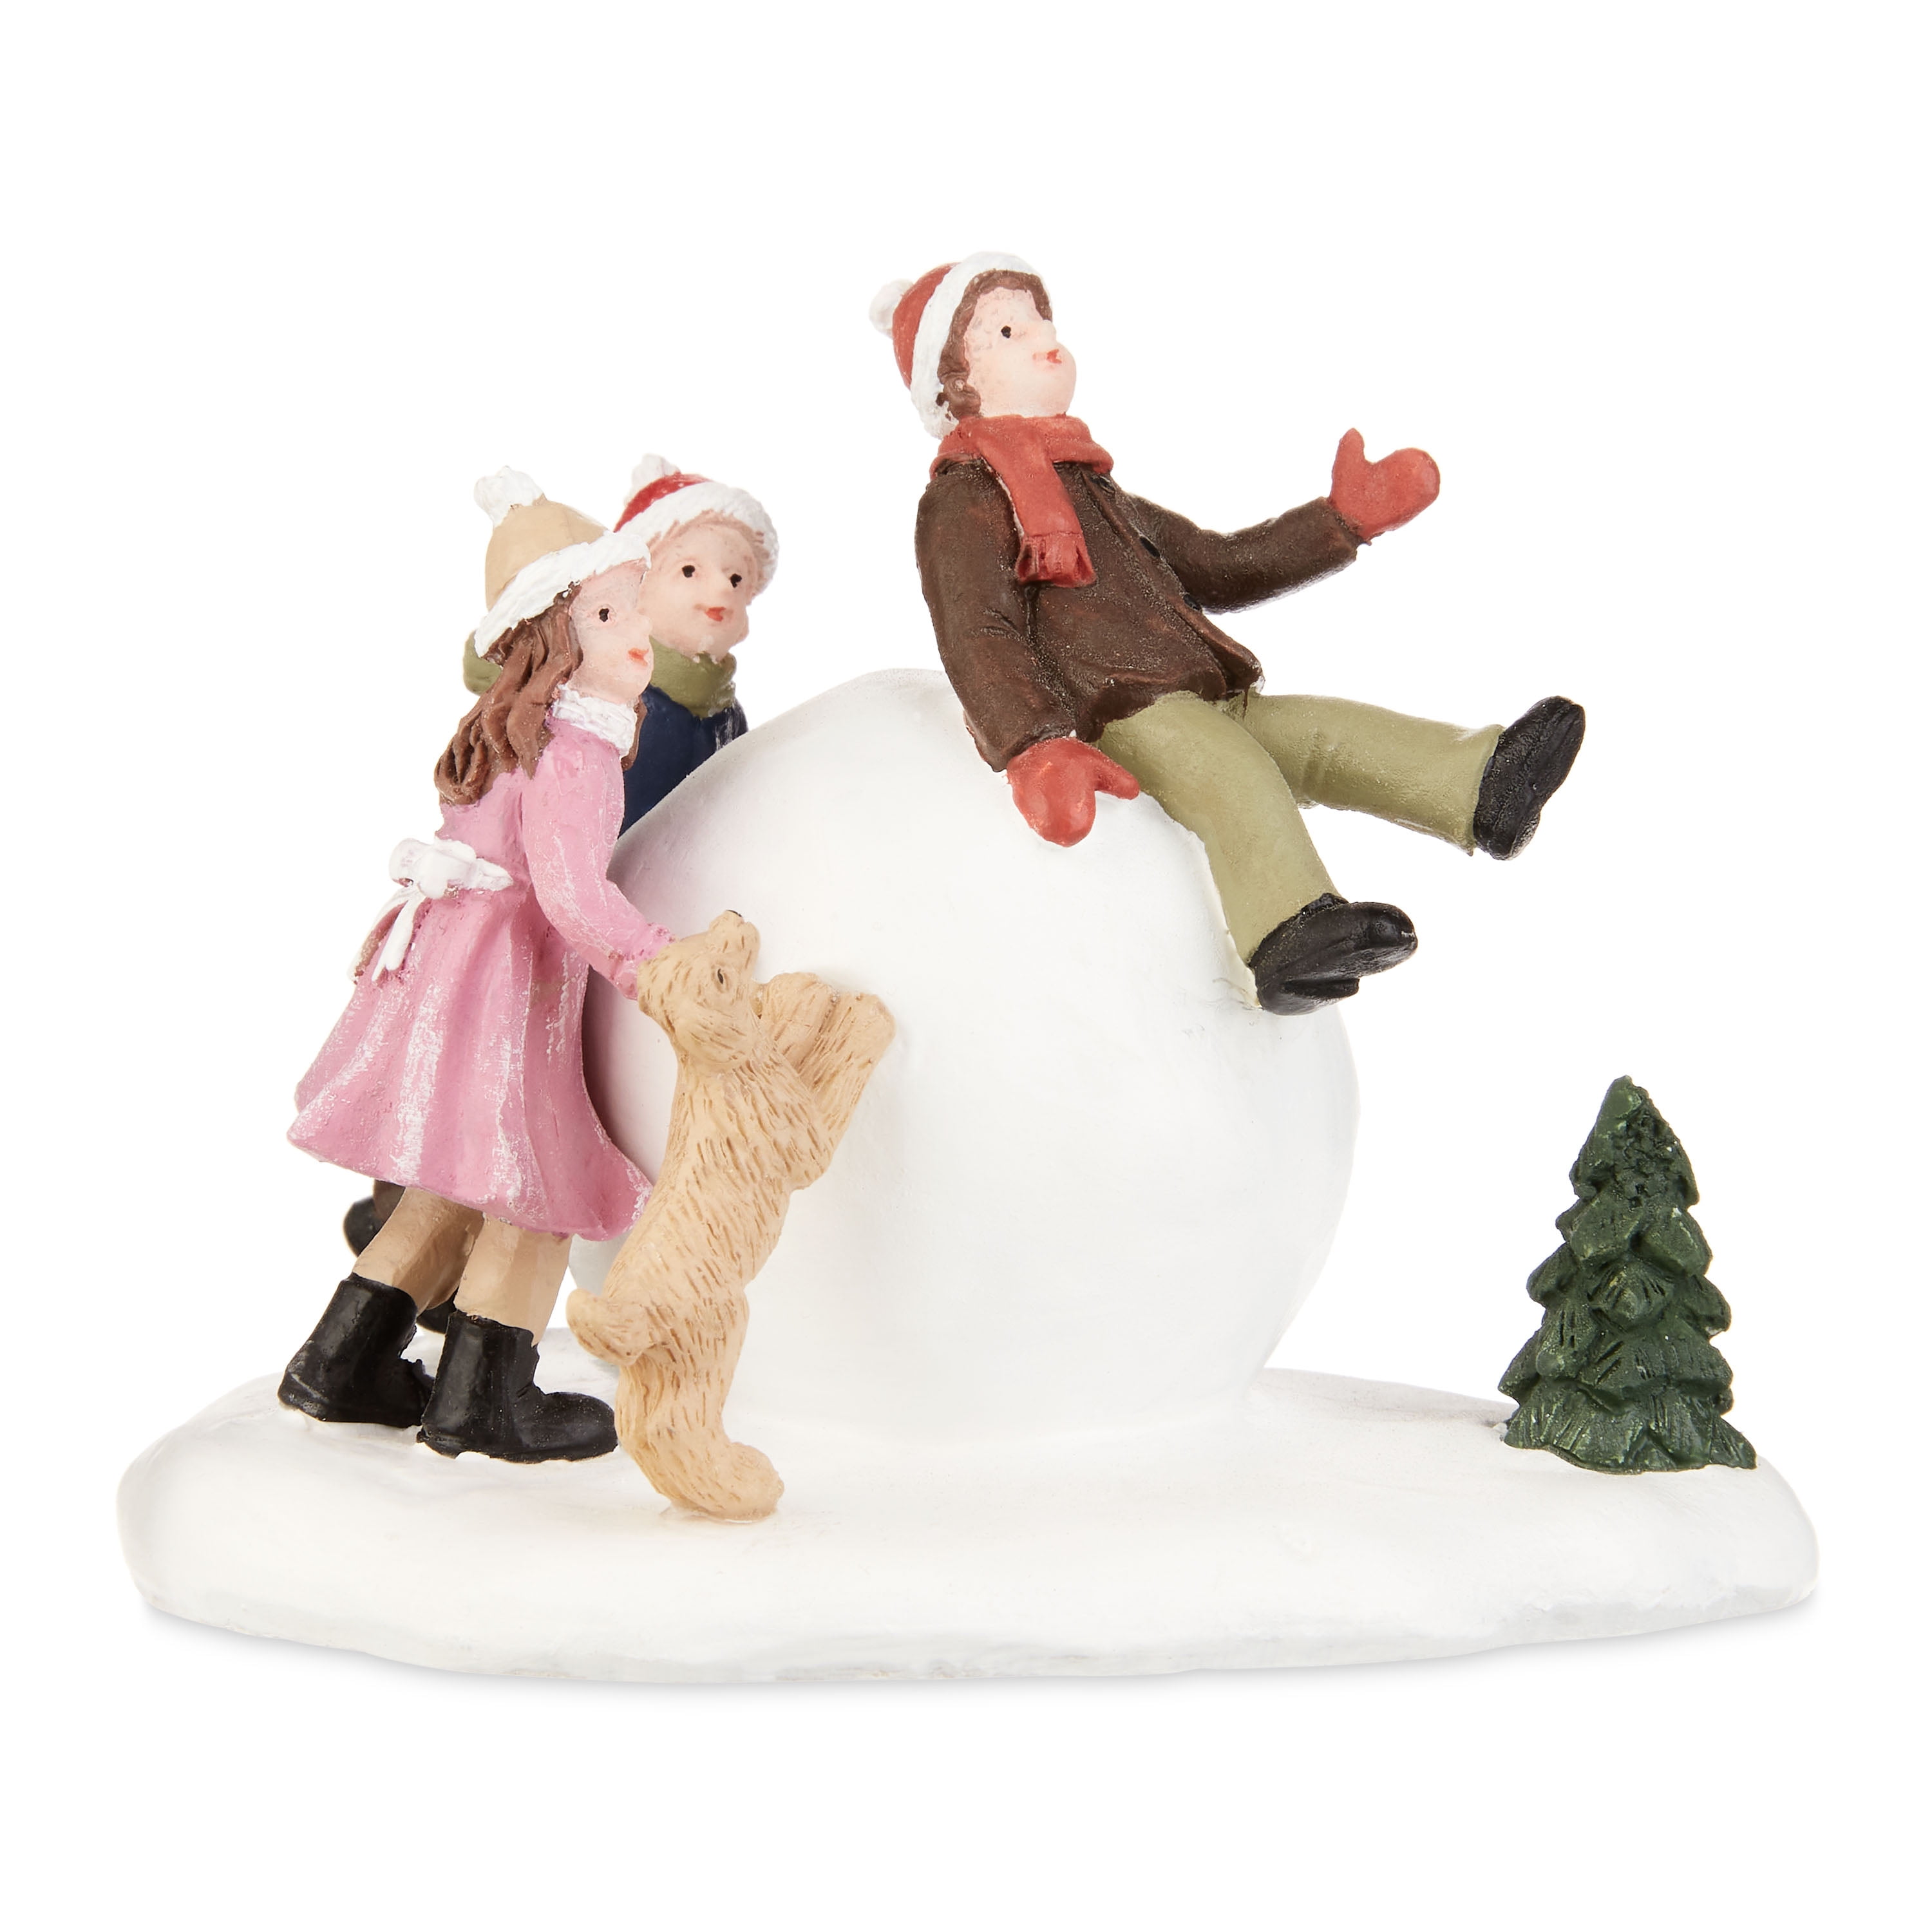 Holiday Time Christmas Indoor Decoration Multi-Color The Big Snowball Village Figurine, 3.5" X 2.5" X 2.5"H